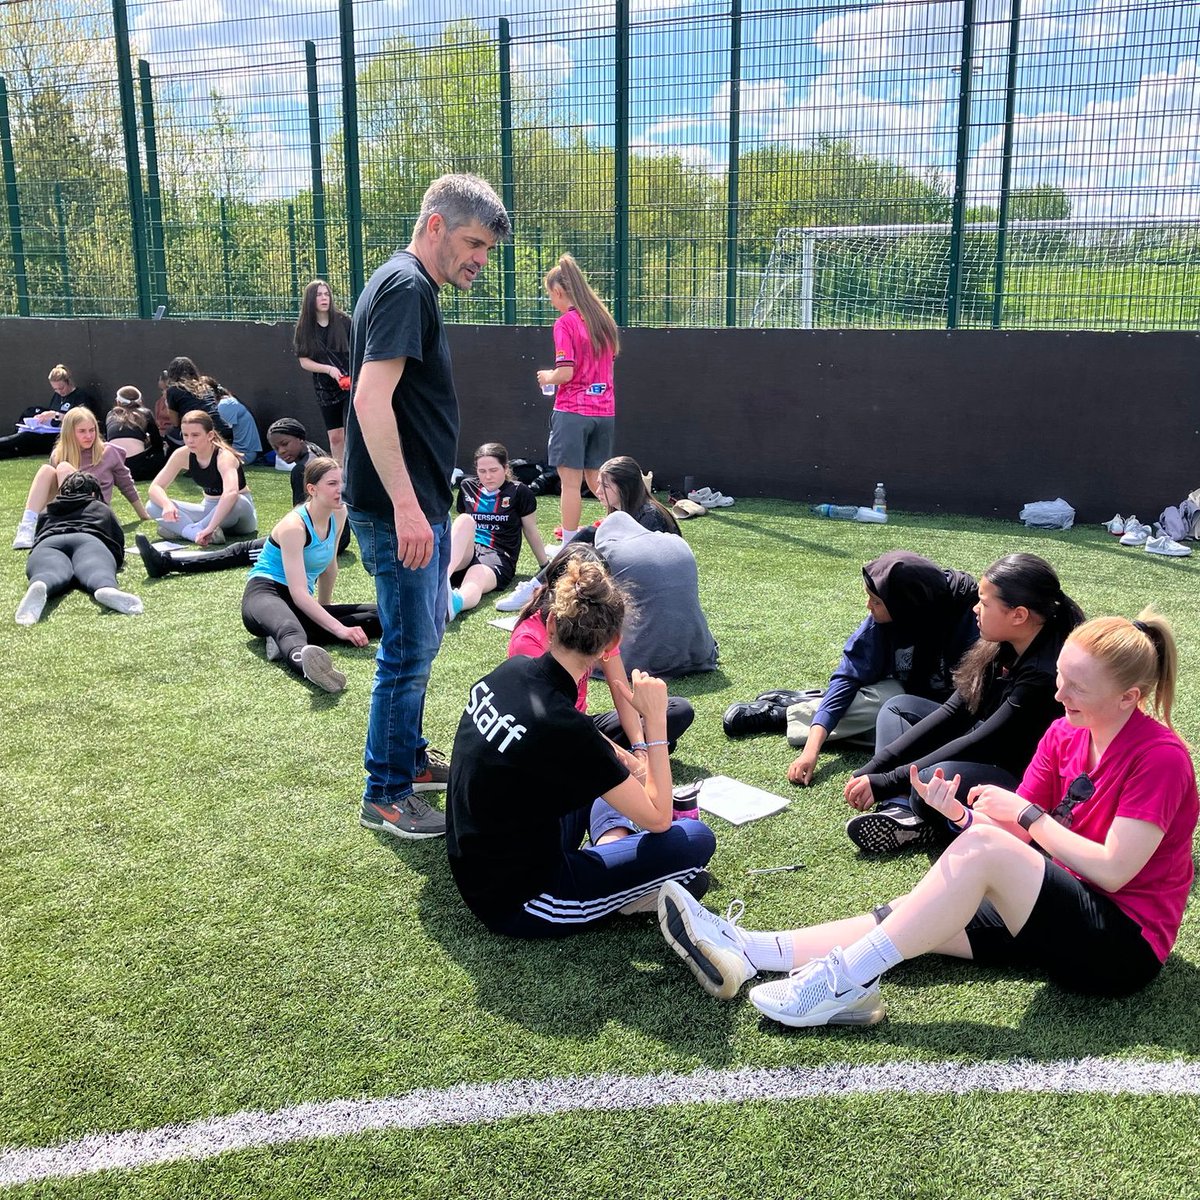 2️⃣4️⃣ 𝐧𝐞𝐰 𝐥𝐞𝐚𝐝𝐞𝐫𝐬!

A brilliant day exploring the skills that make a good leader, how to work & motivate others, equipping the girls with the skills to be effective leaders 🙌

@FundforIreland #BeyondTheBall